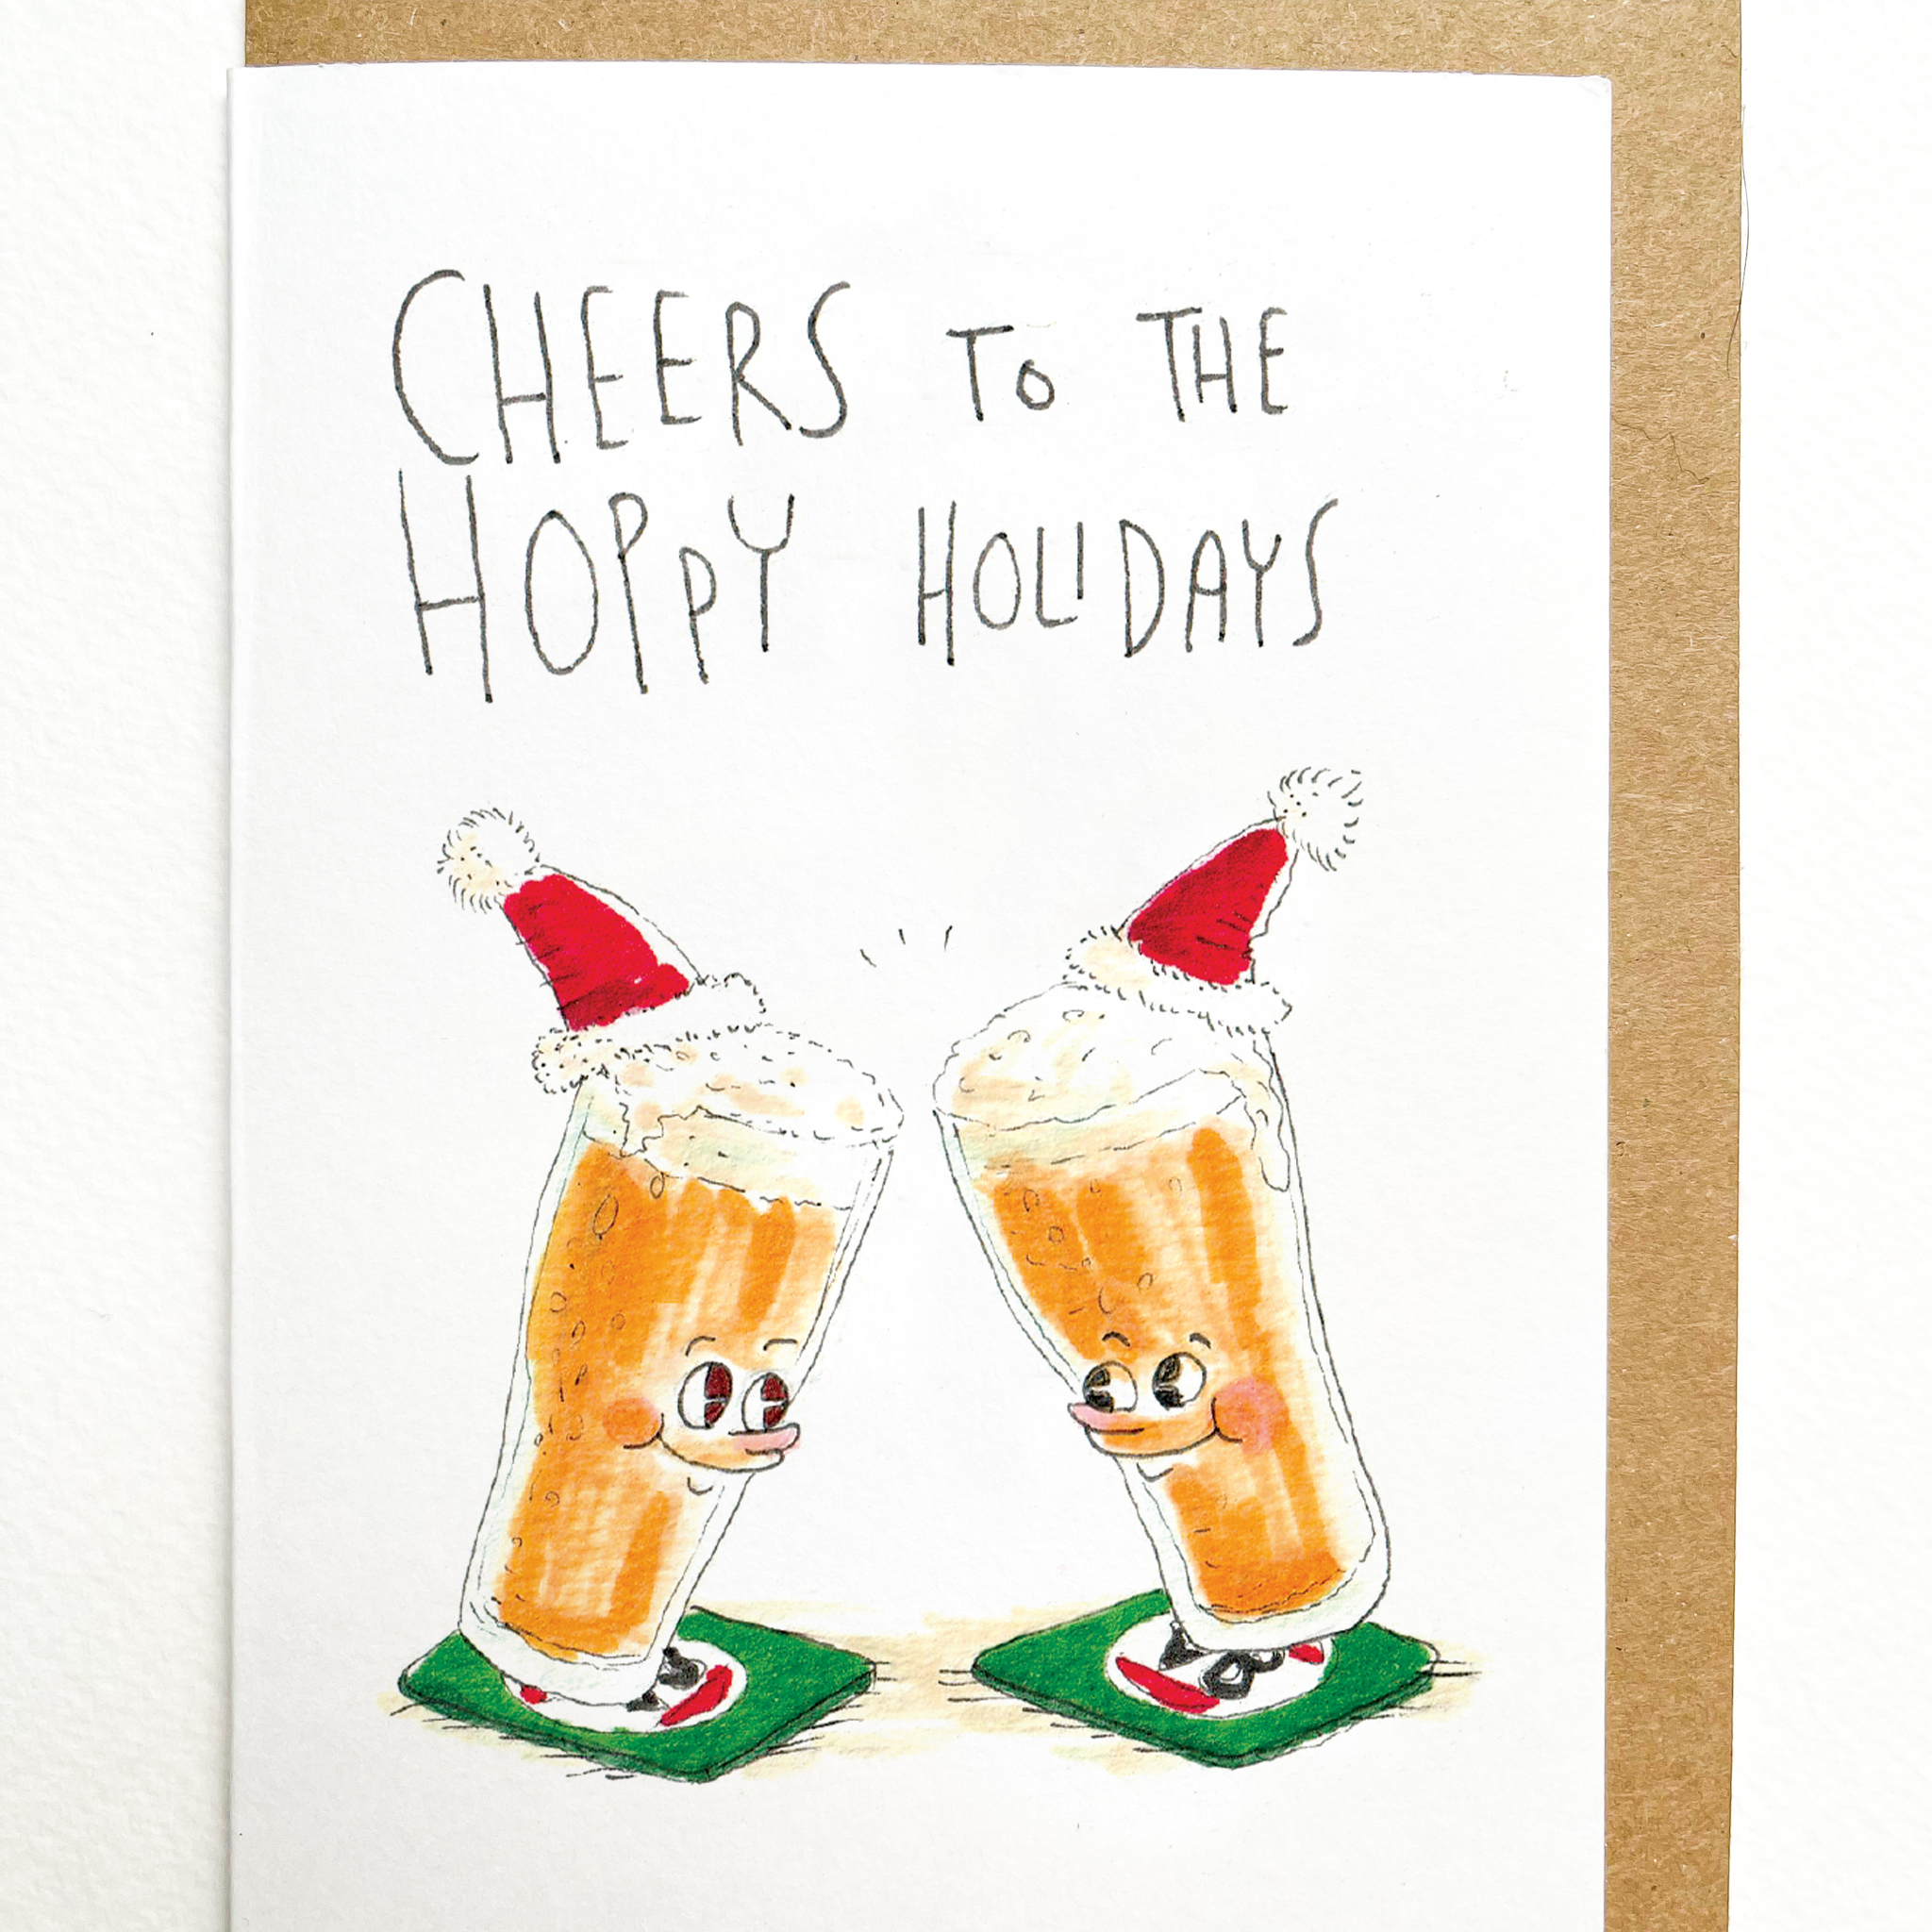 Cheers to the Hoppy Holidays